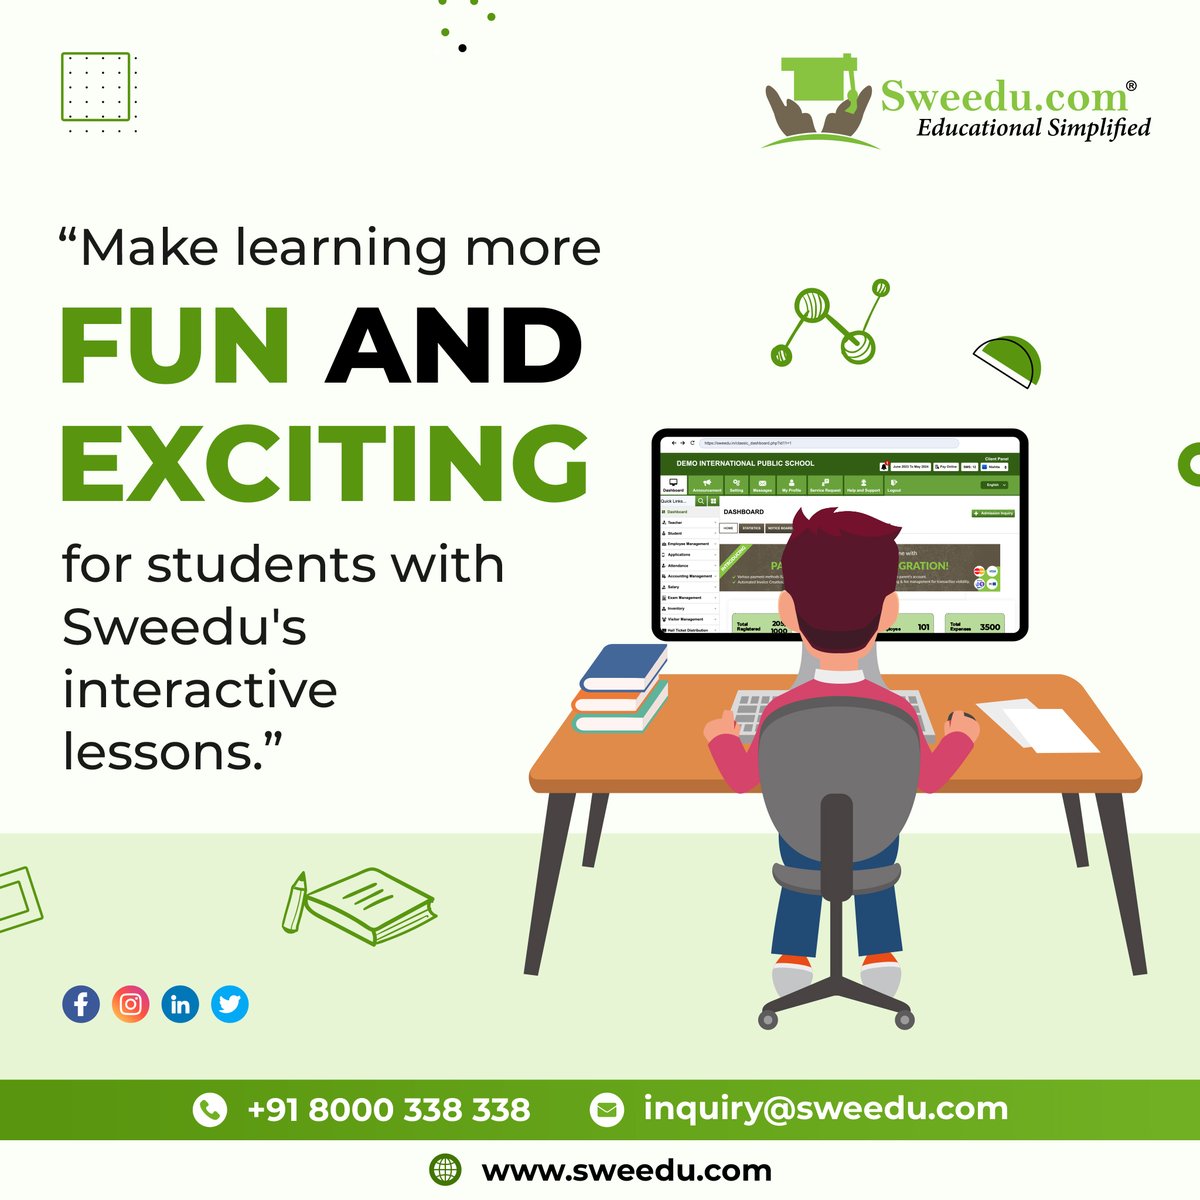 Discover a whole new way to learn! With Sweedu's interactive lessons, education becomes a thrilling adventure